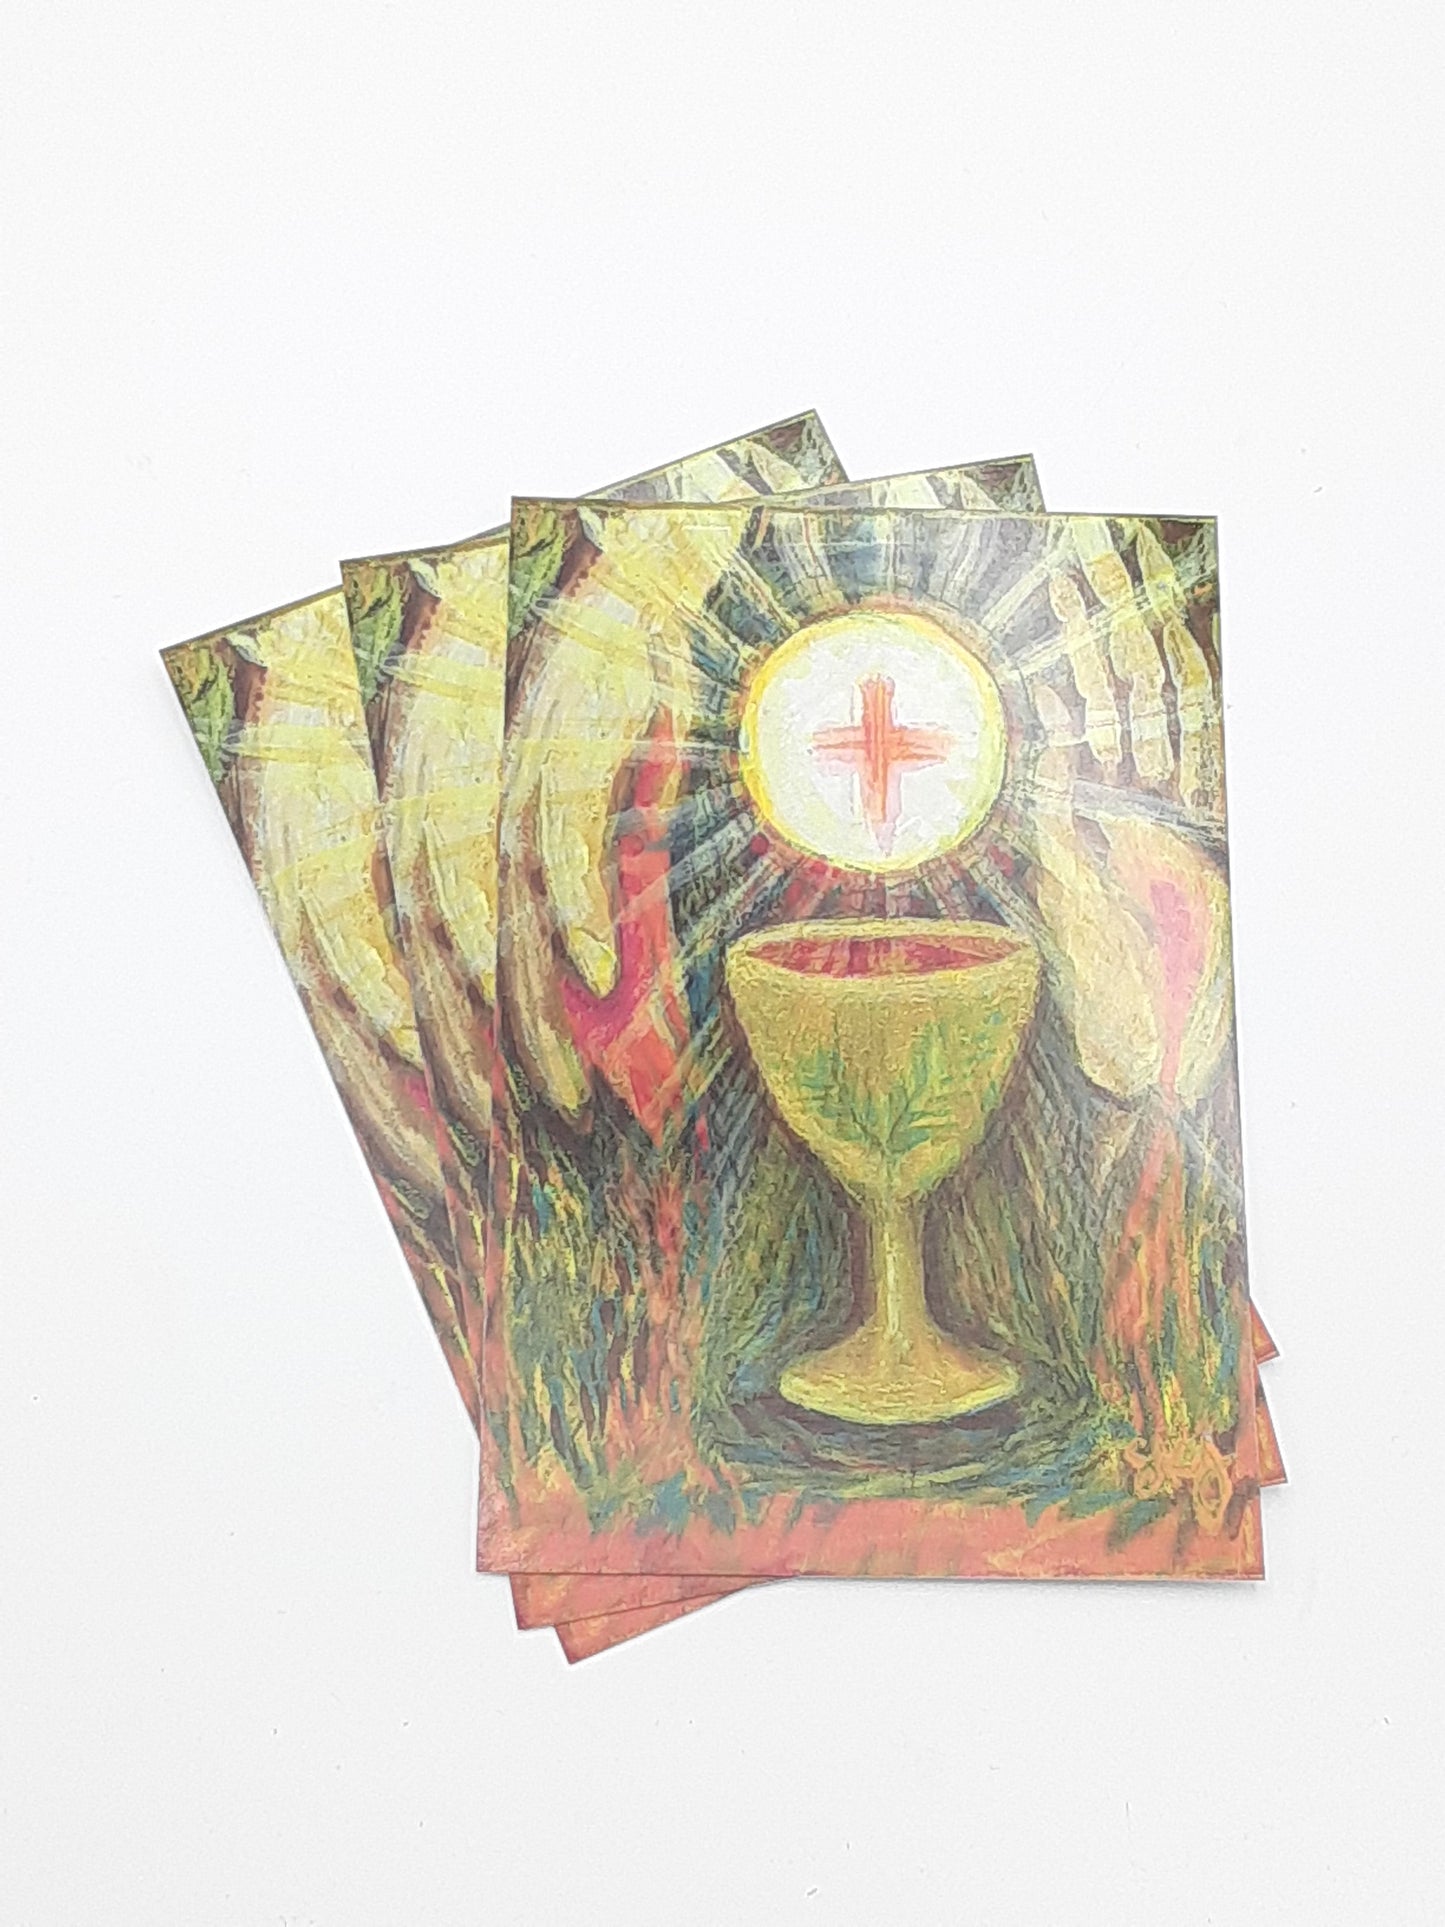 Eucharistic Image "By His Blood" Postcard